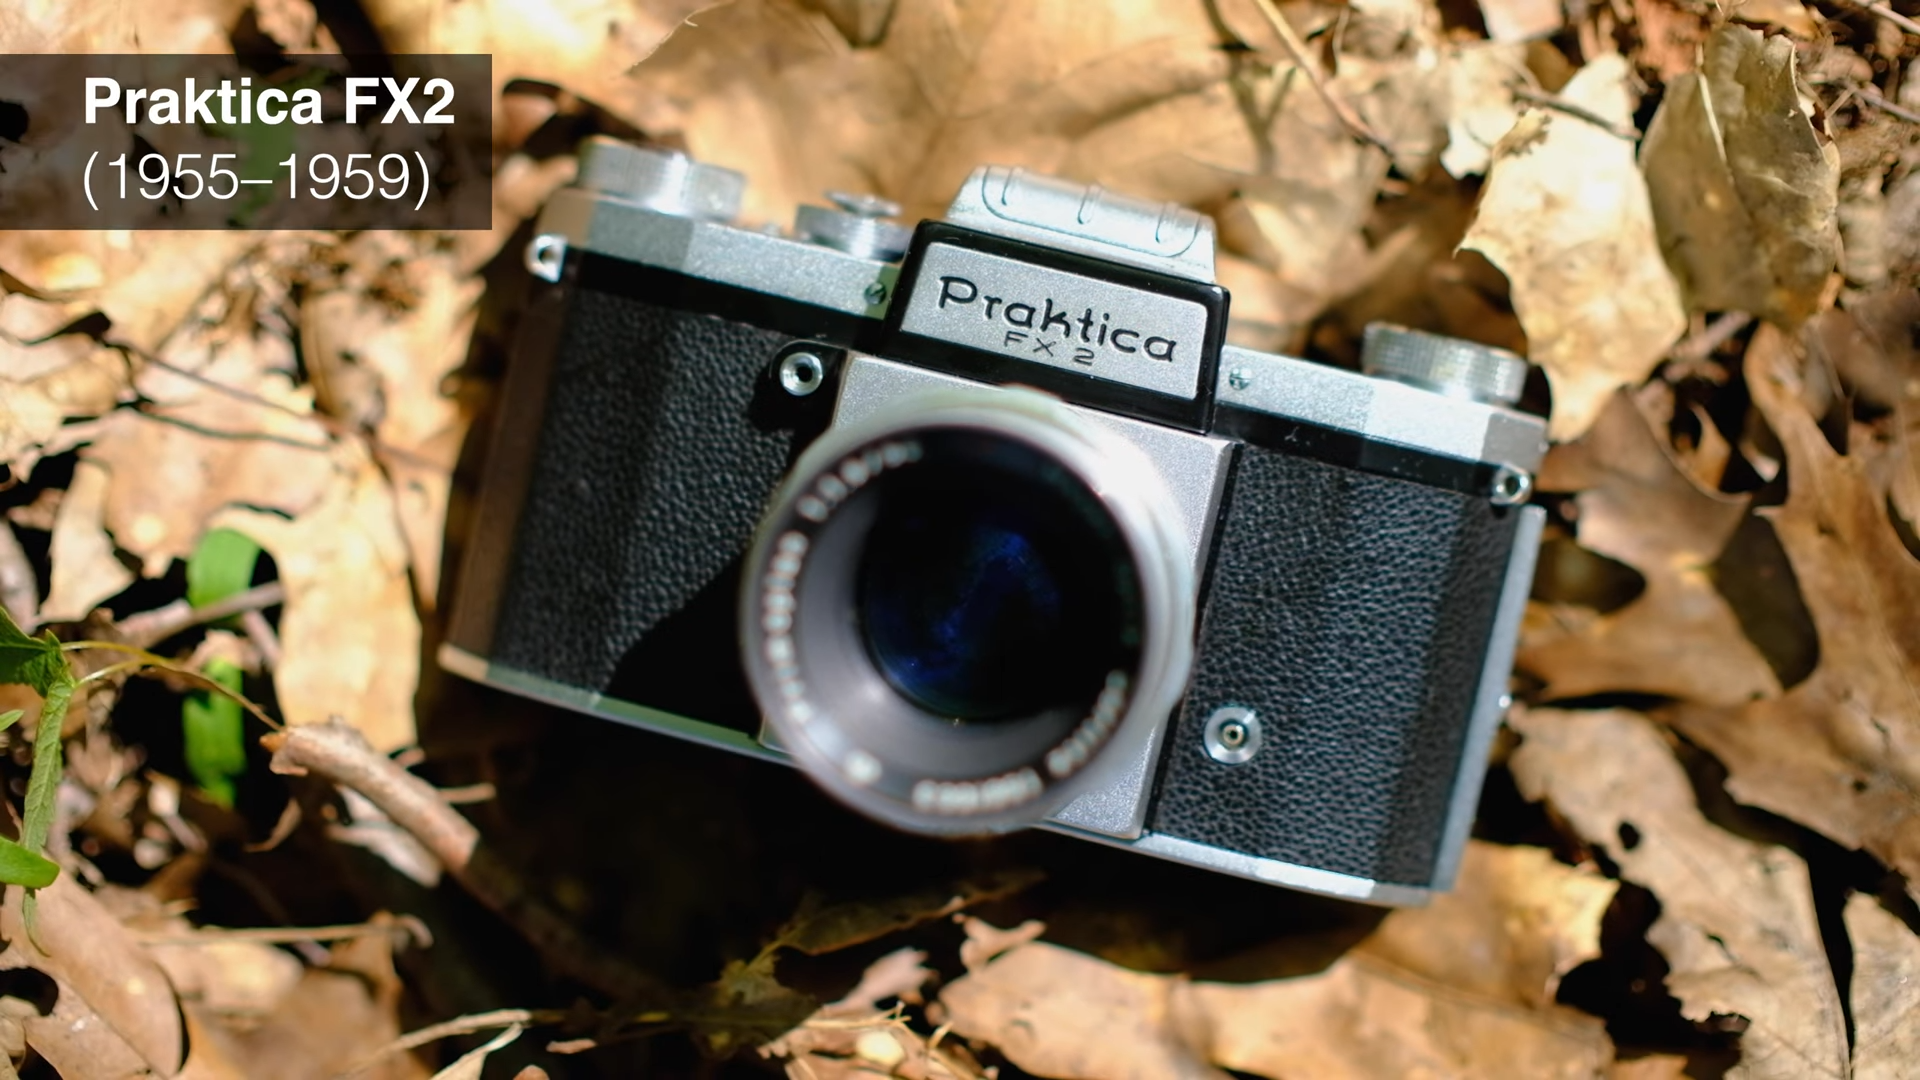 Load video: Video review of Praktica FX2 by Toms Cameras